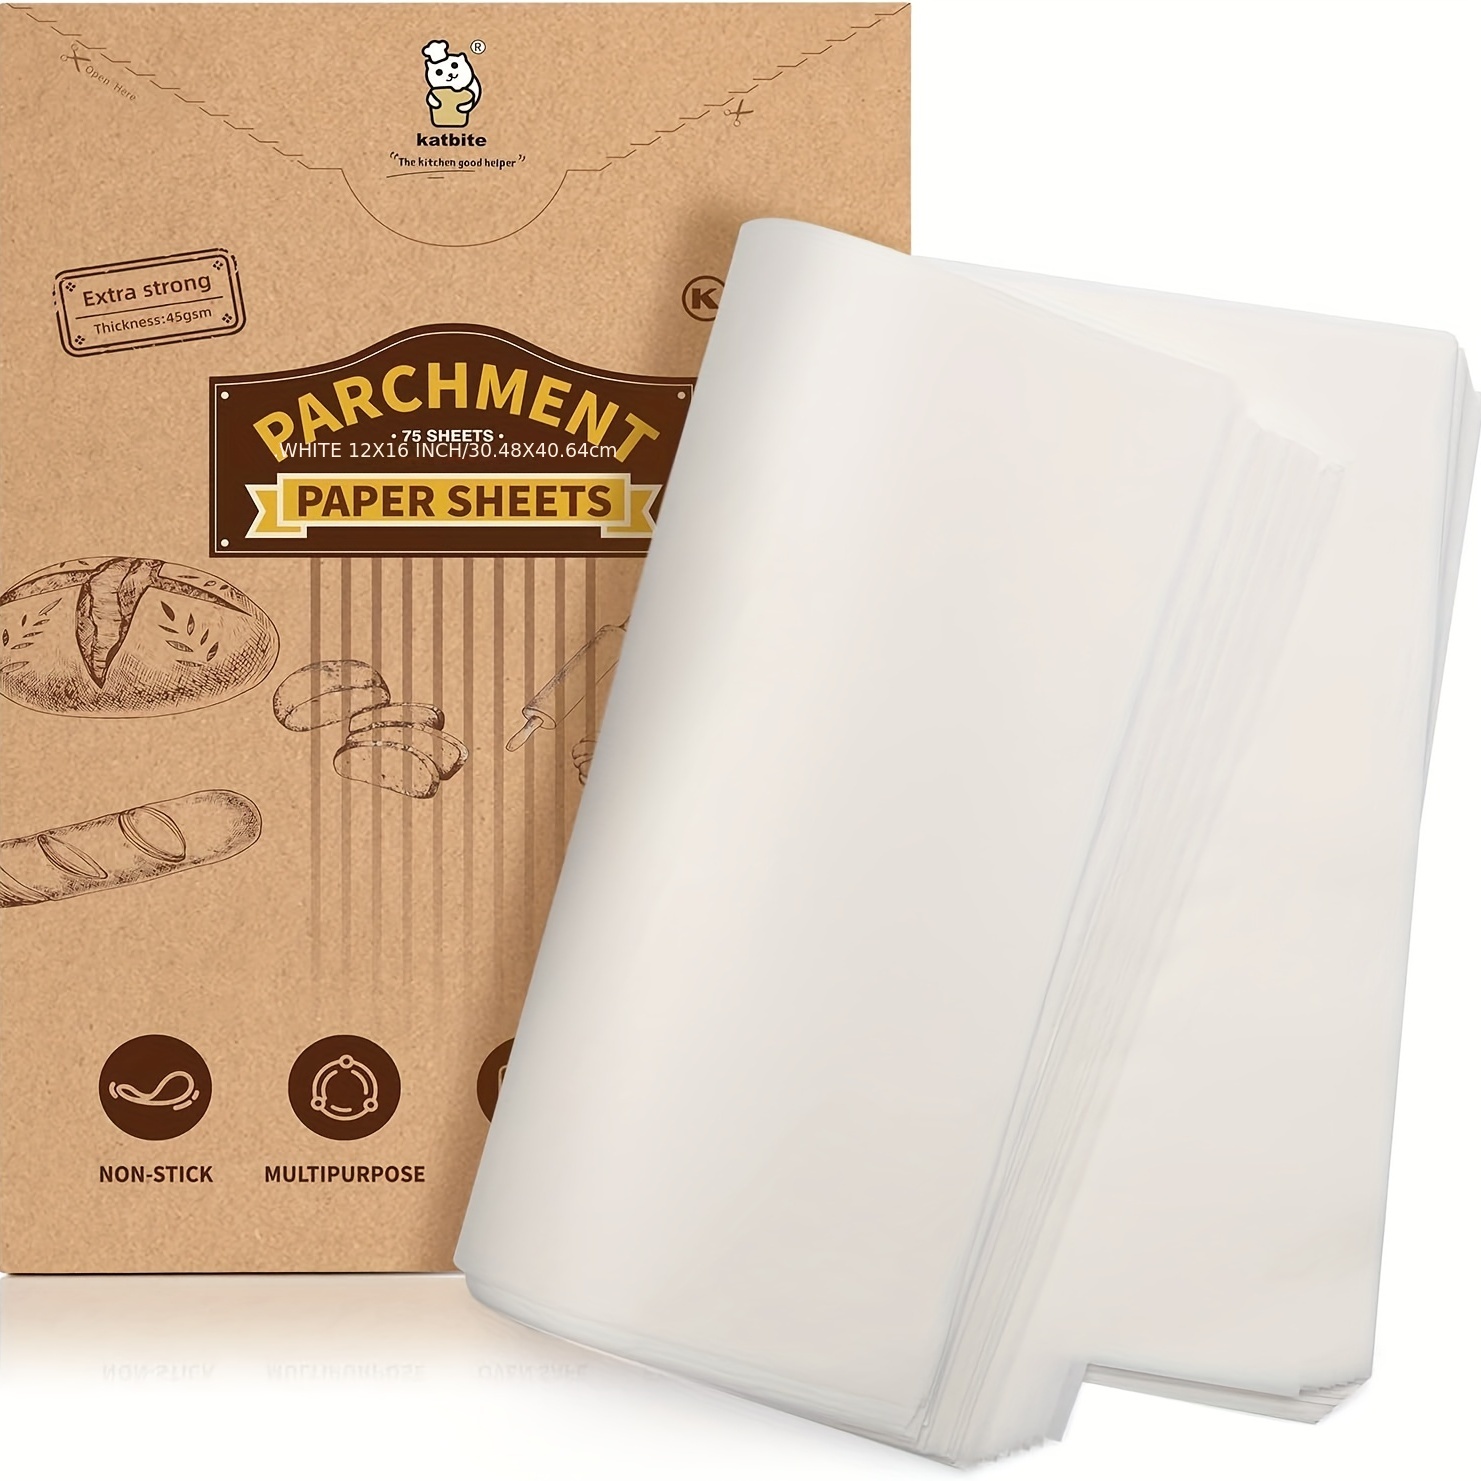 Katbite 12x16 Inch Parchment Paper Sheets, Pre cut Unbleached Baking Paper,  Heavy Duty & Non-stick for Half Sheet Baking, Cooking, Grilling Wrapping